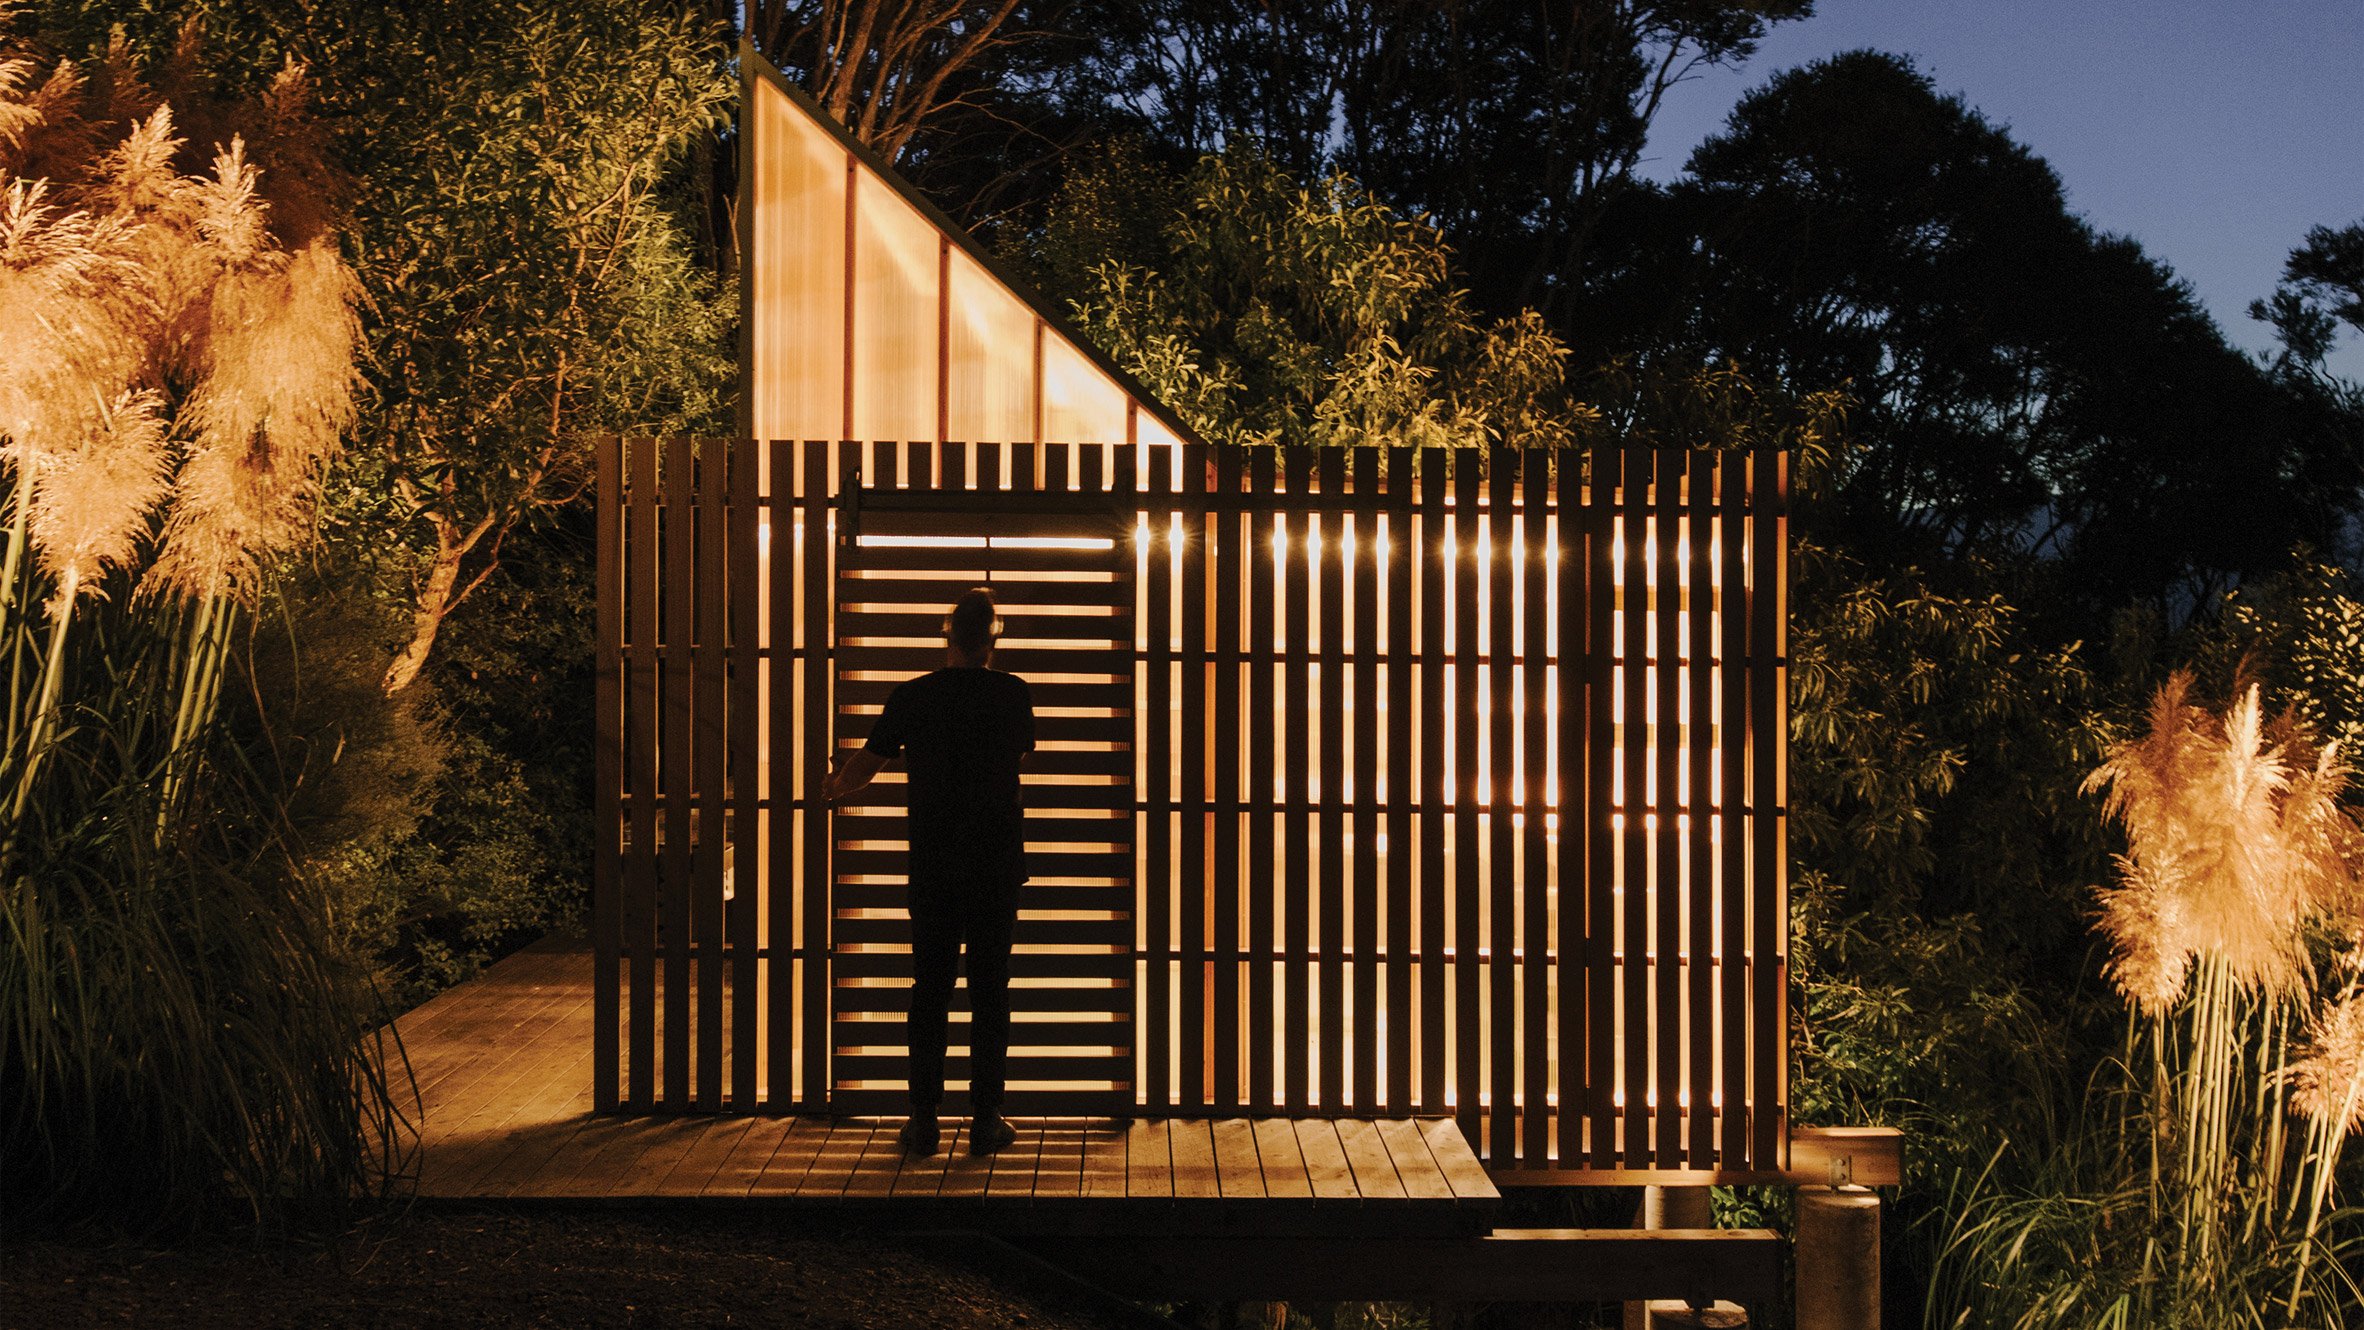 Silhouette of a person standing in front of a mono-pitched polycarbonate shed on a wooden deck shining light through timber slats on a slope in the New Zealand bush